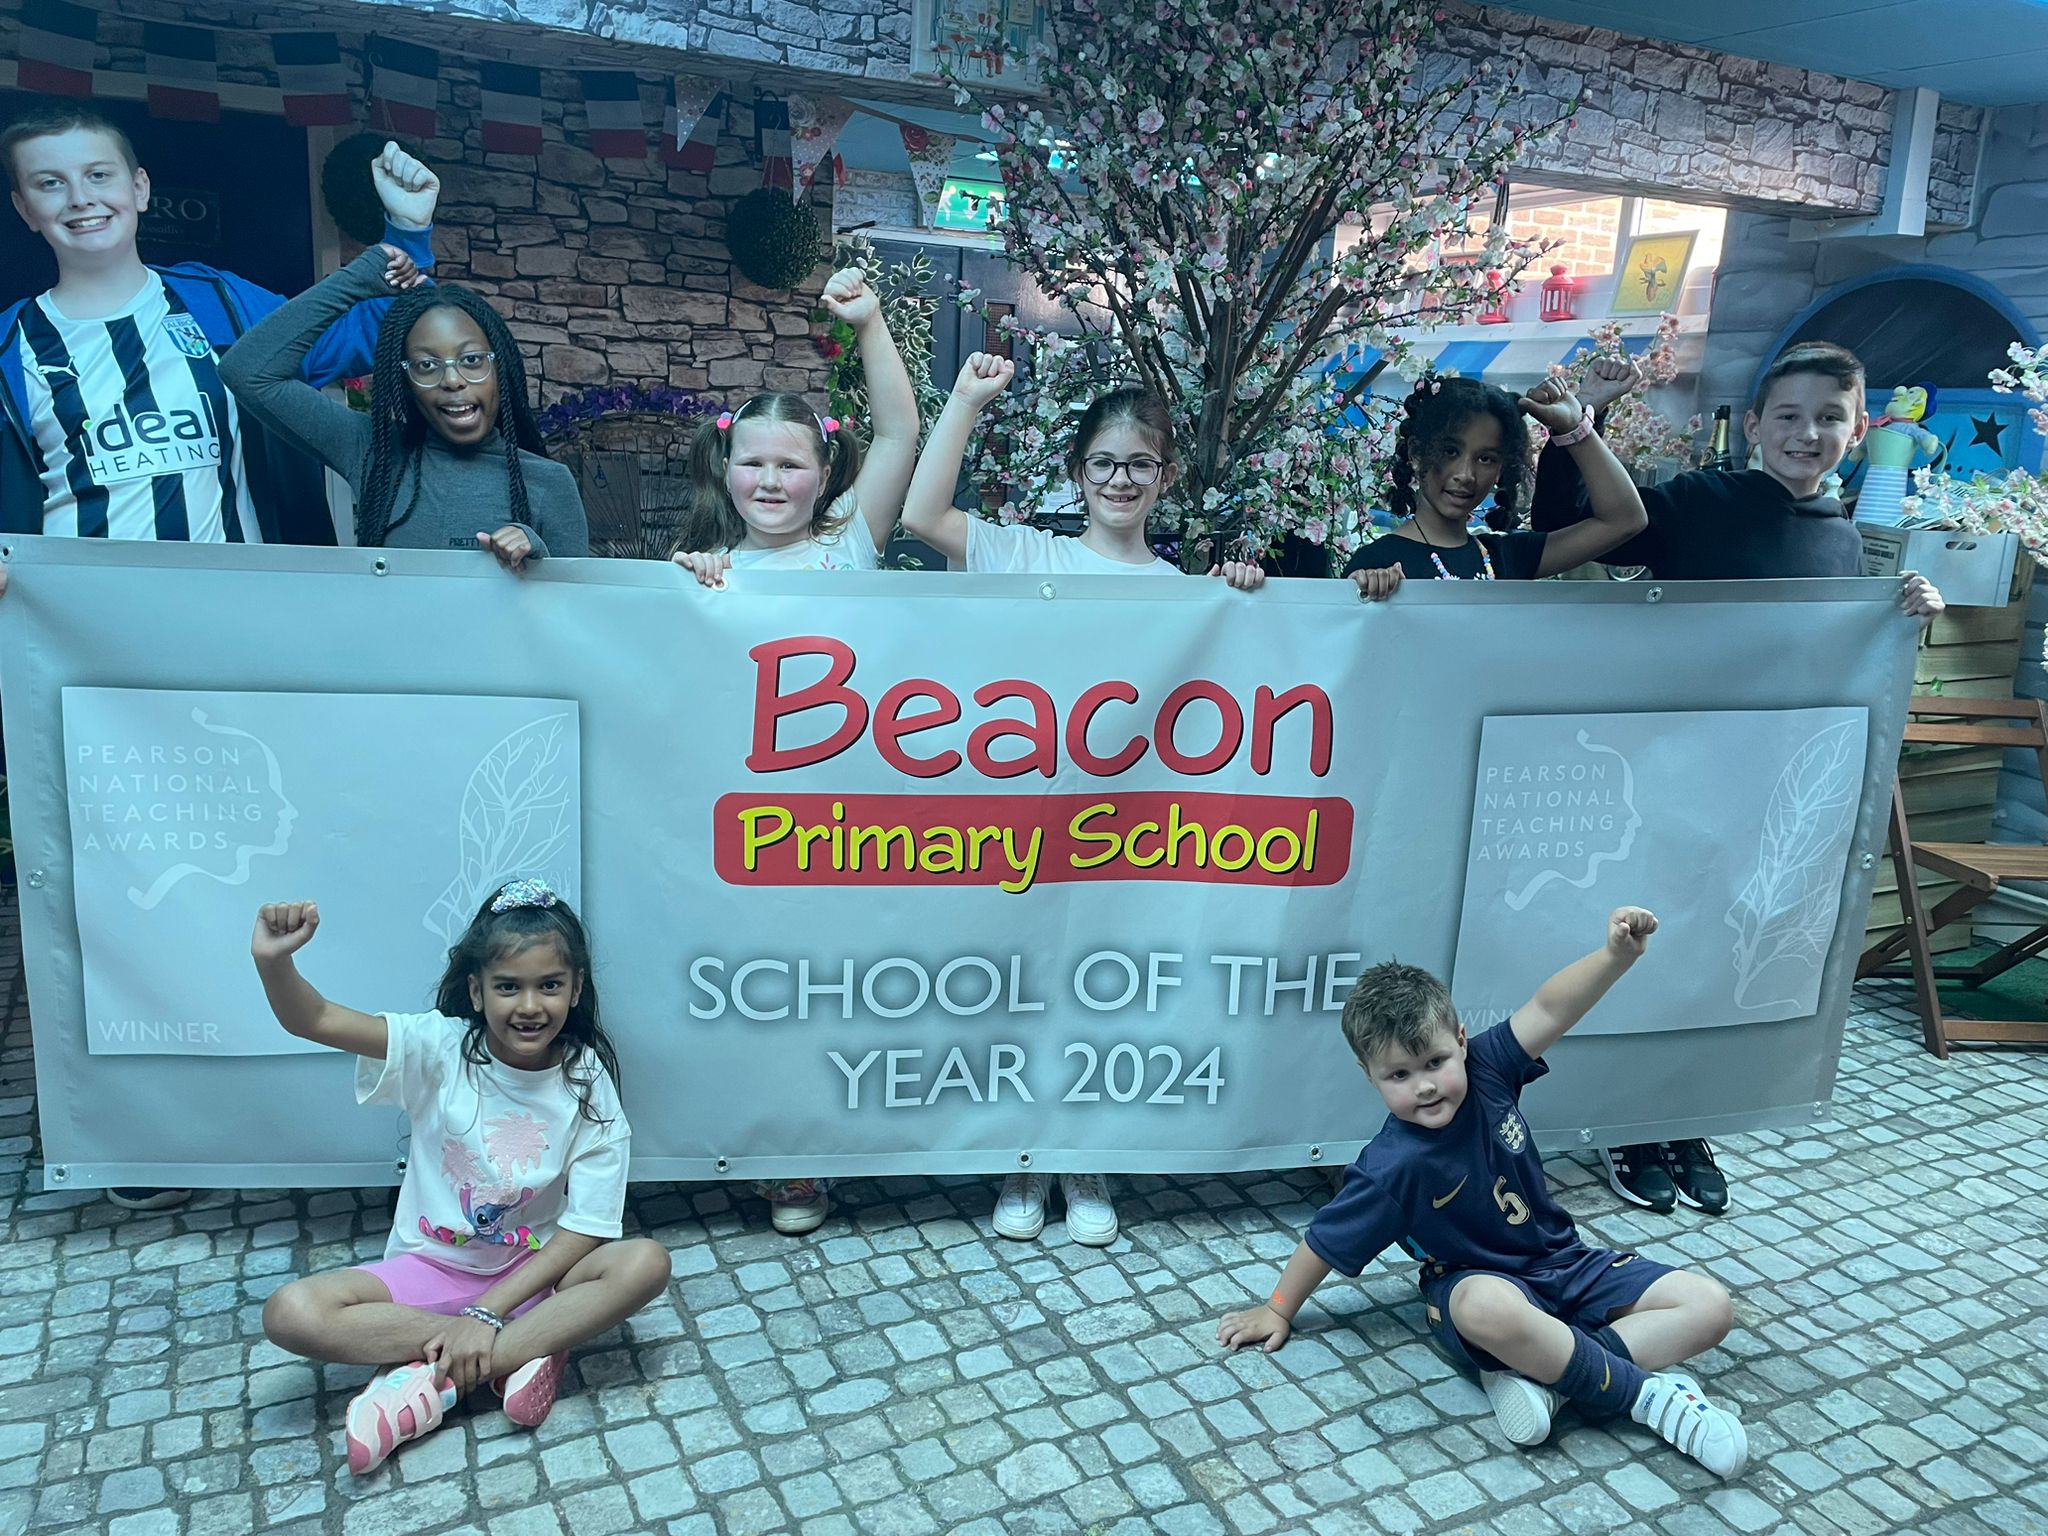 Image depicts children from Beacon Primary School holding a banner to celebrate School of the Year.